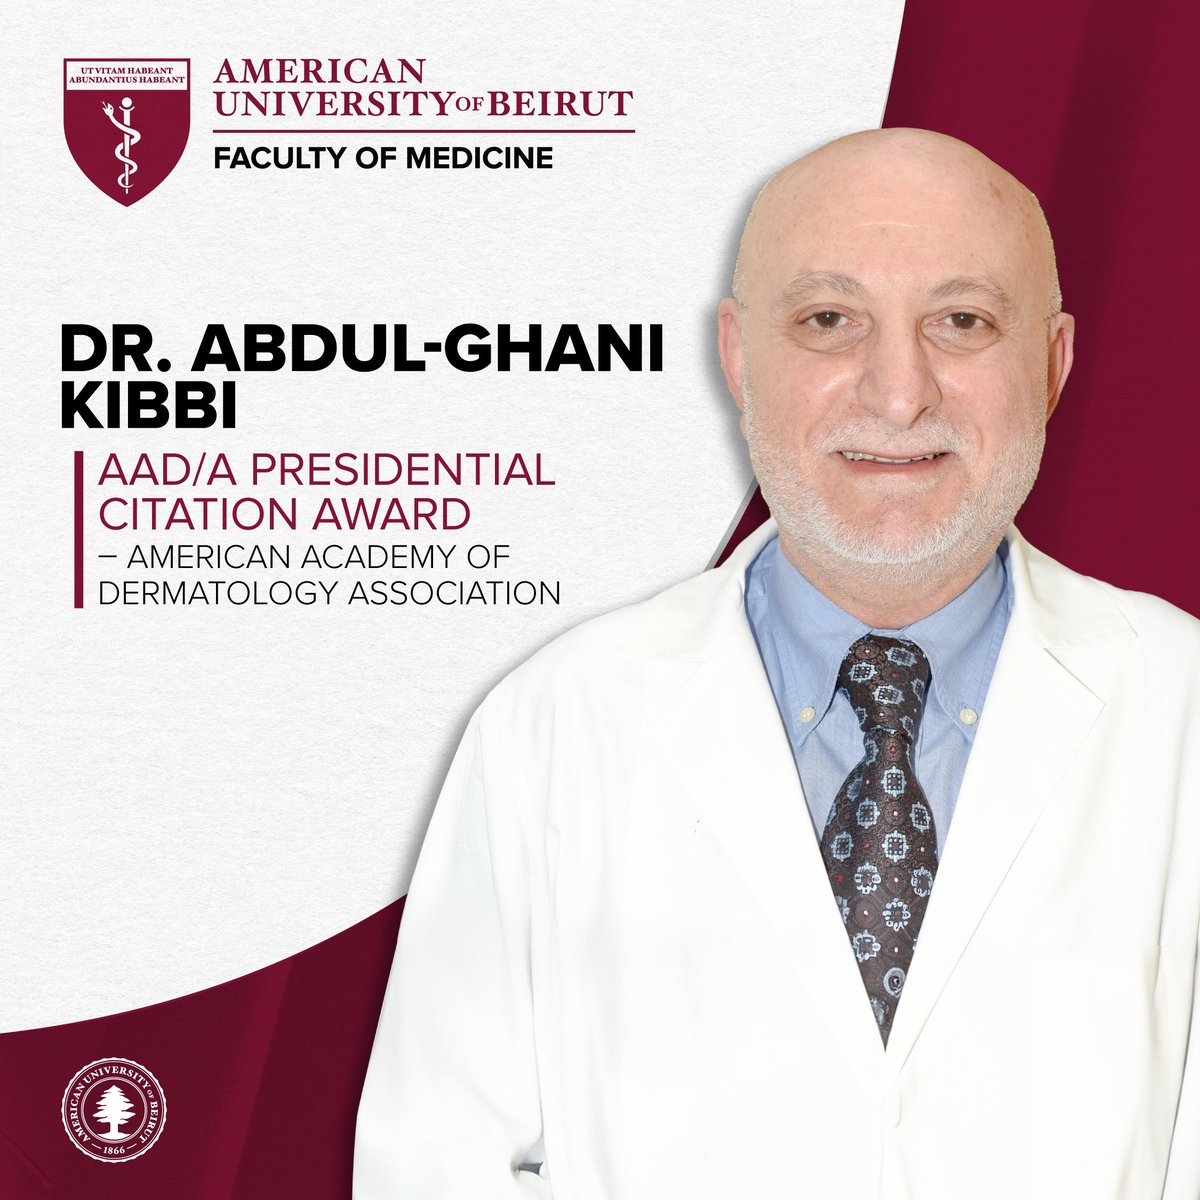 🌟Congratulations to Dr. Abdul-Ghani Kibbi on receiving the Presidential Citation Award from the American Academy of Dermatology Association! Learn more about his contributions: rb.gy/gp9nj3 #AUBFM #AUBMedicine #AUBProud